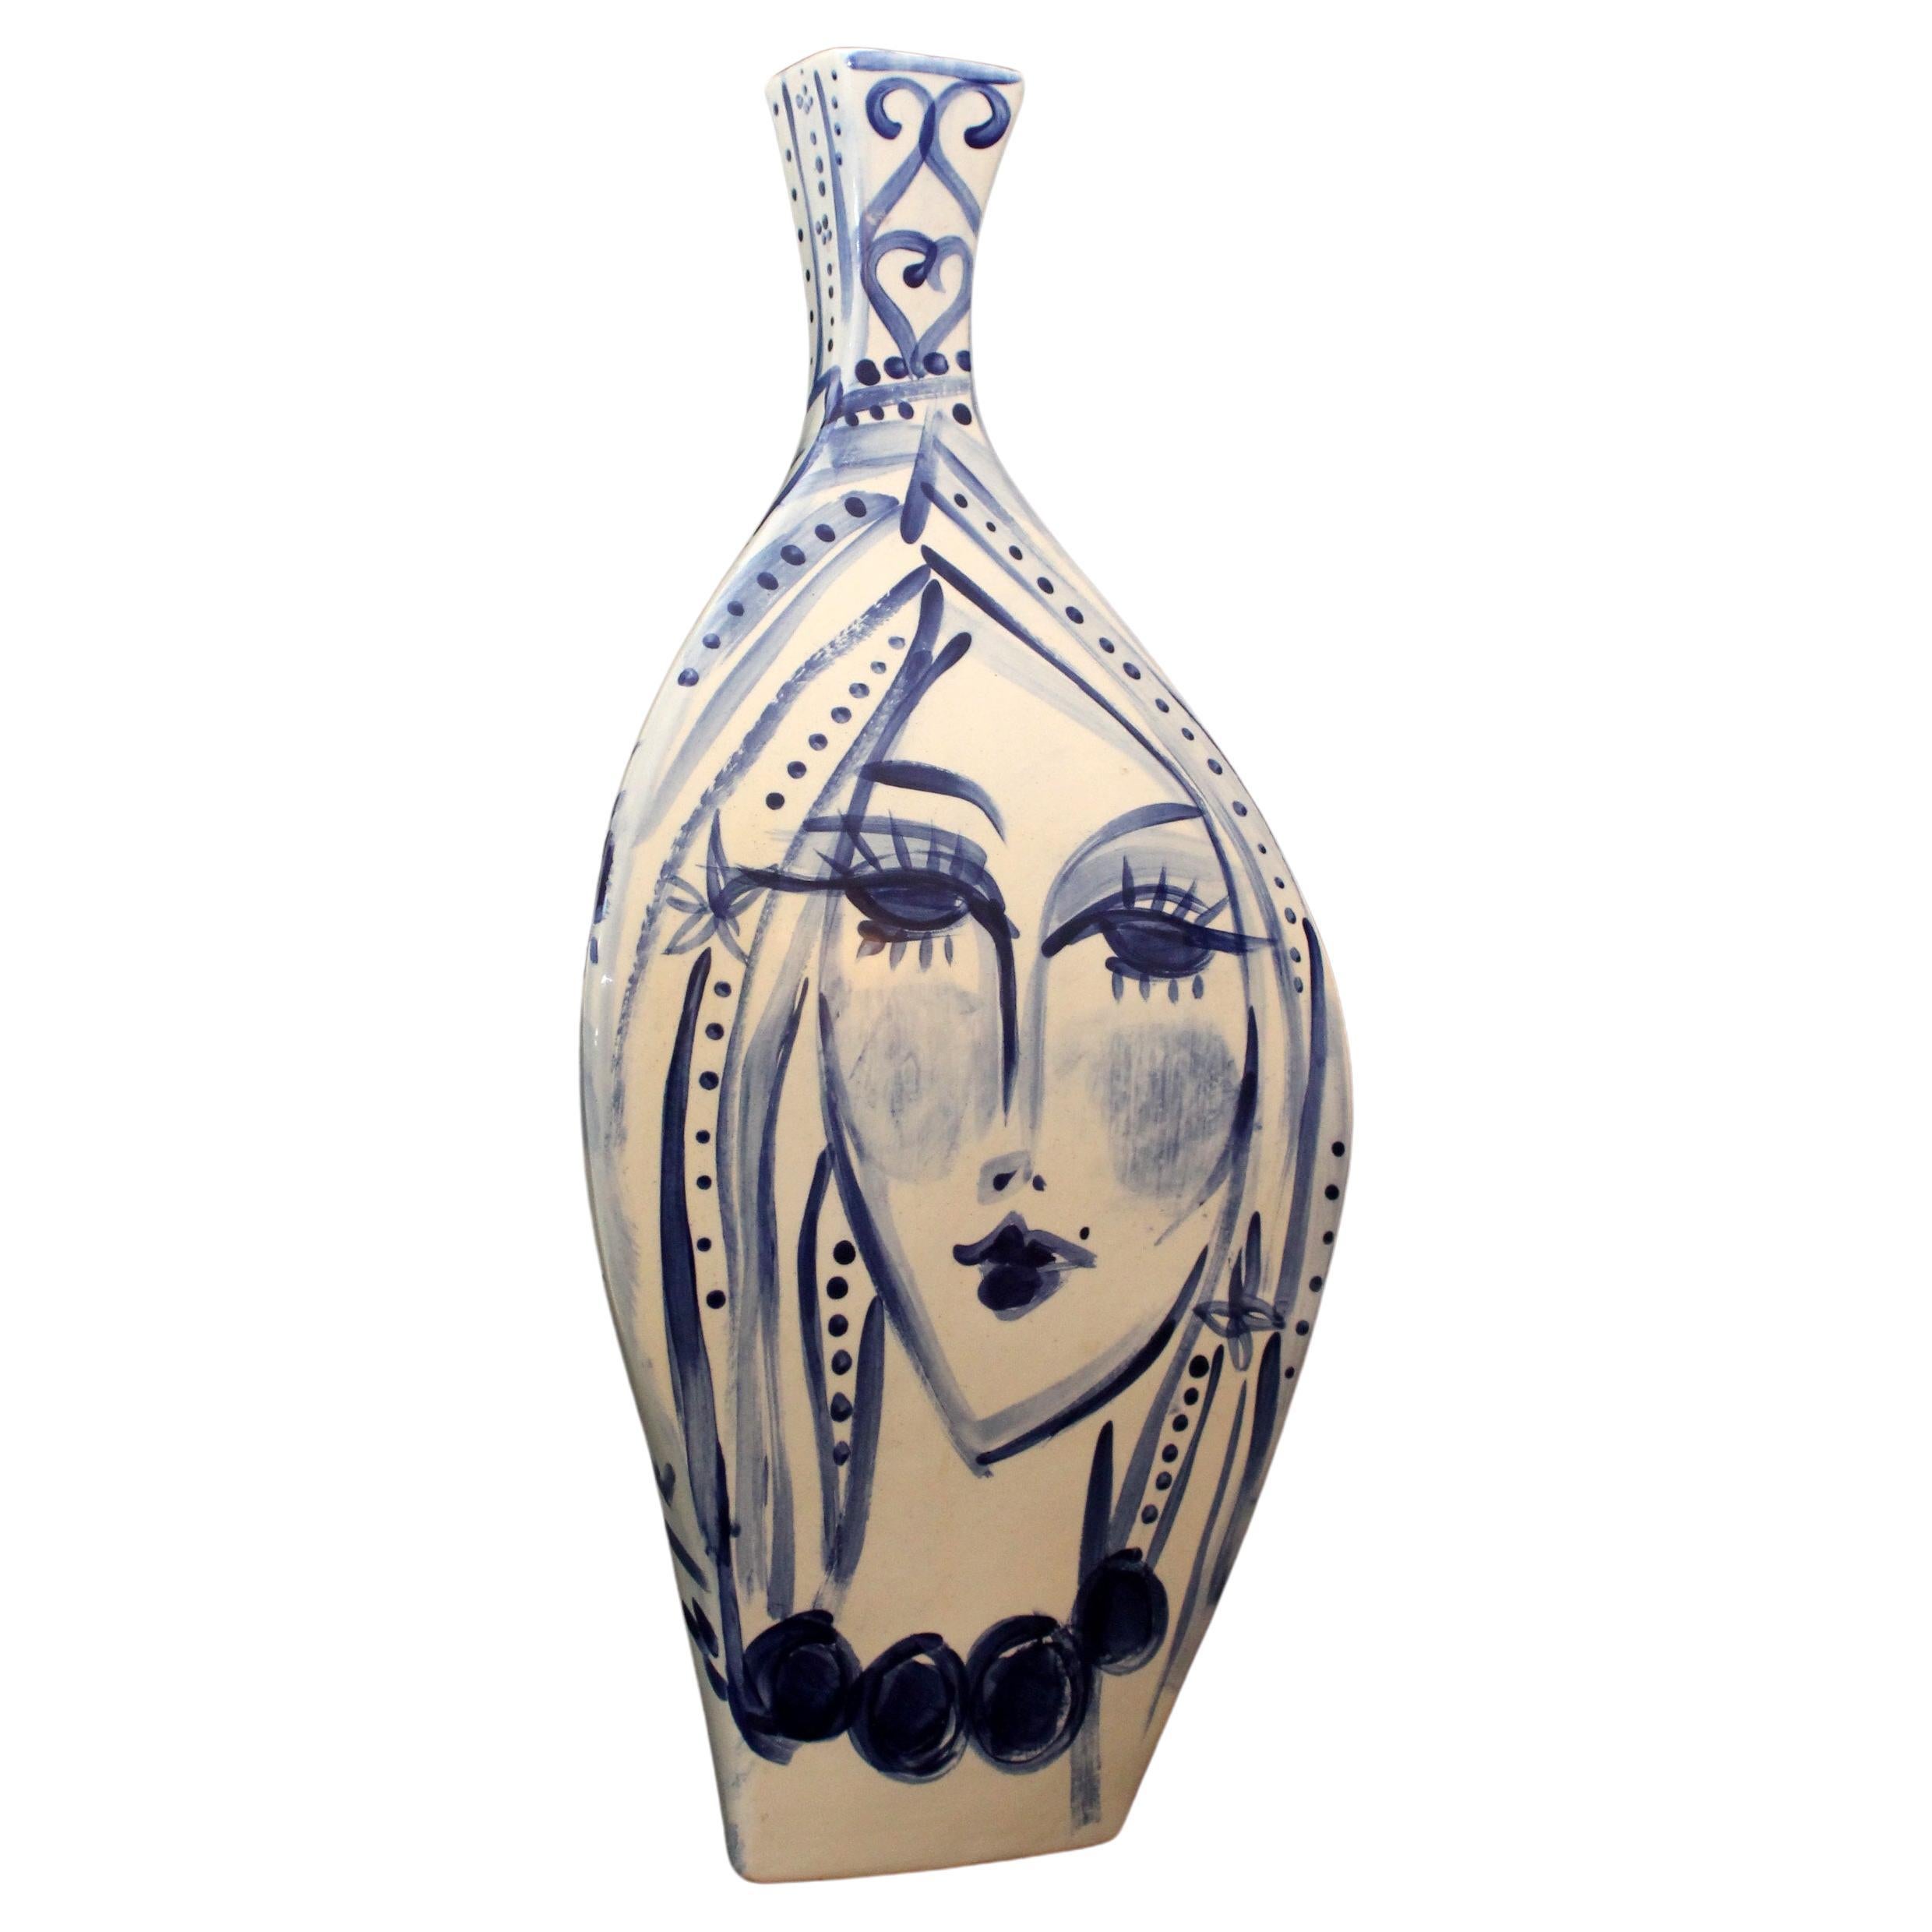 Cris Conde )) Amorphous (hand crafted/painted) signed ceramic vase (55x23x21cm) For Sale